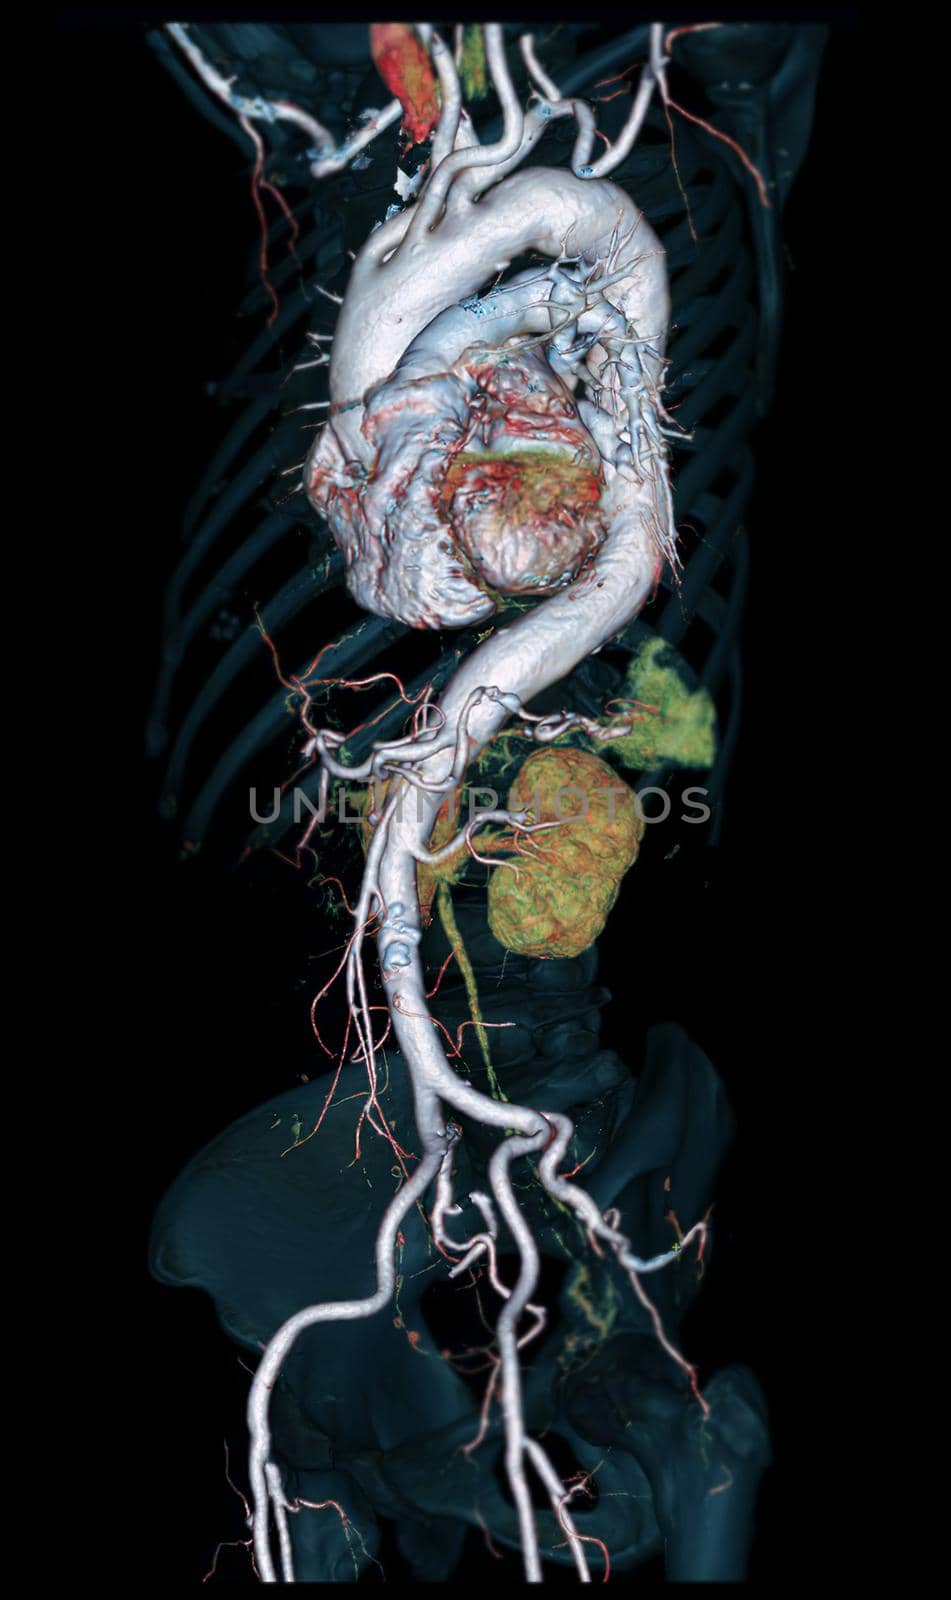 CTA Whole aorta 3D rendering image oblique view on black background for detect aortic aneurysm.